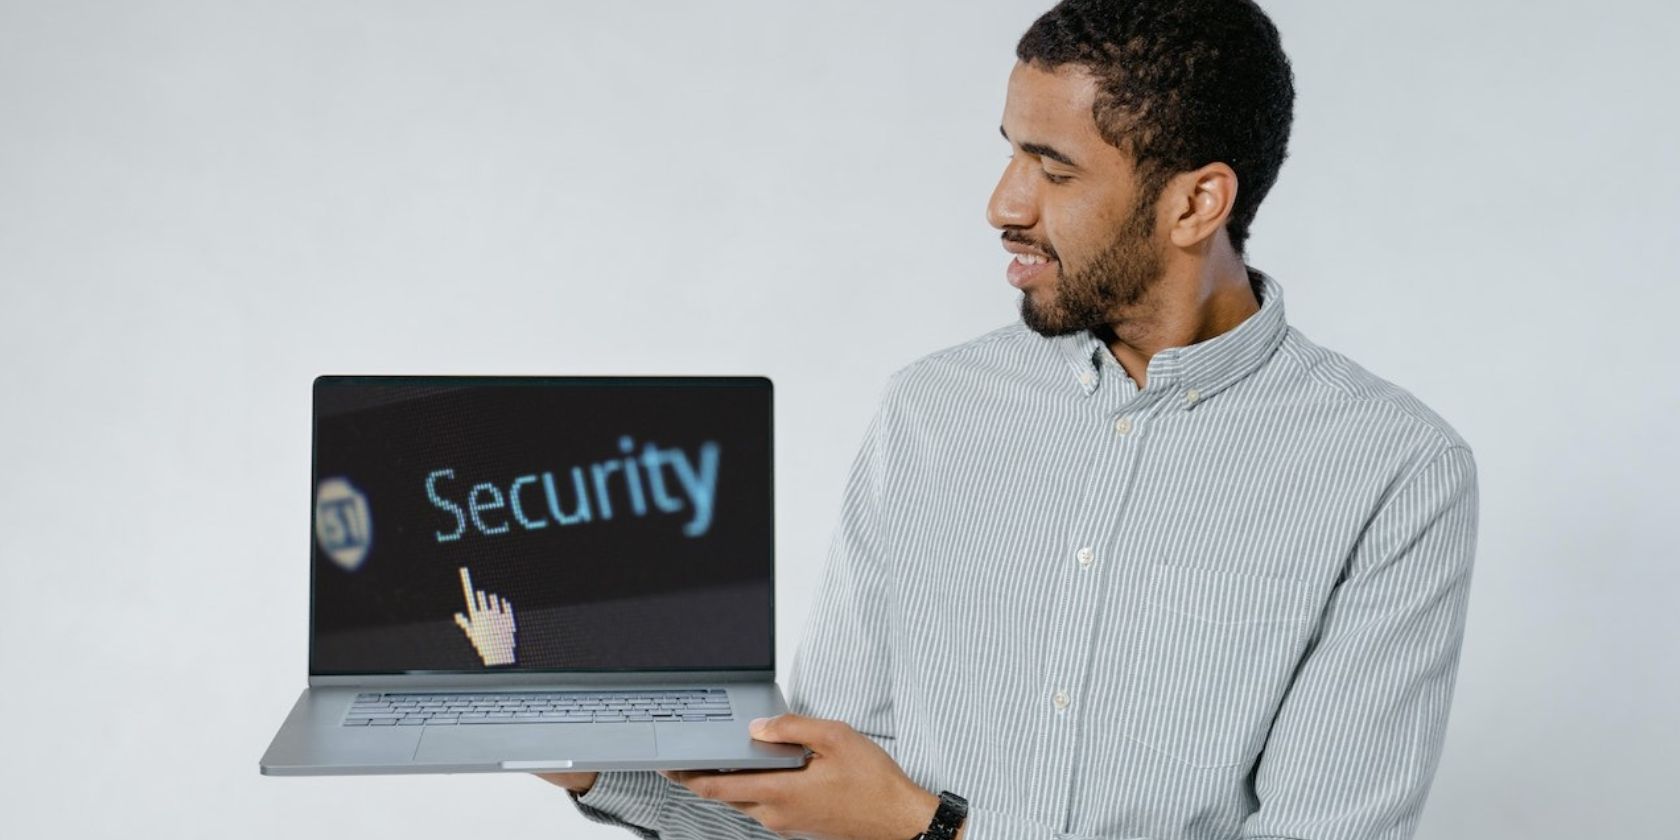 MacBook Pro in a man's hand with the word “Security” on screen